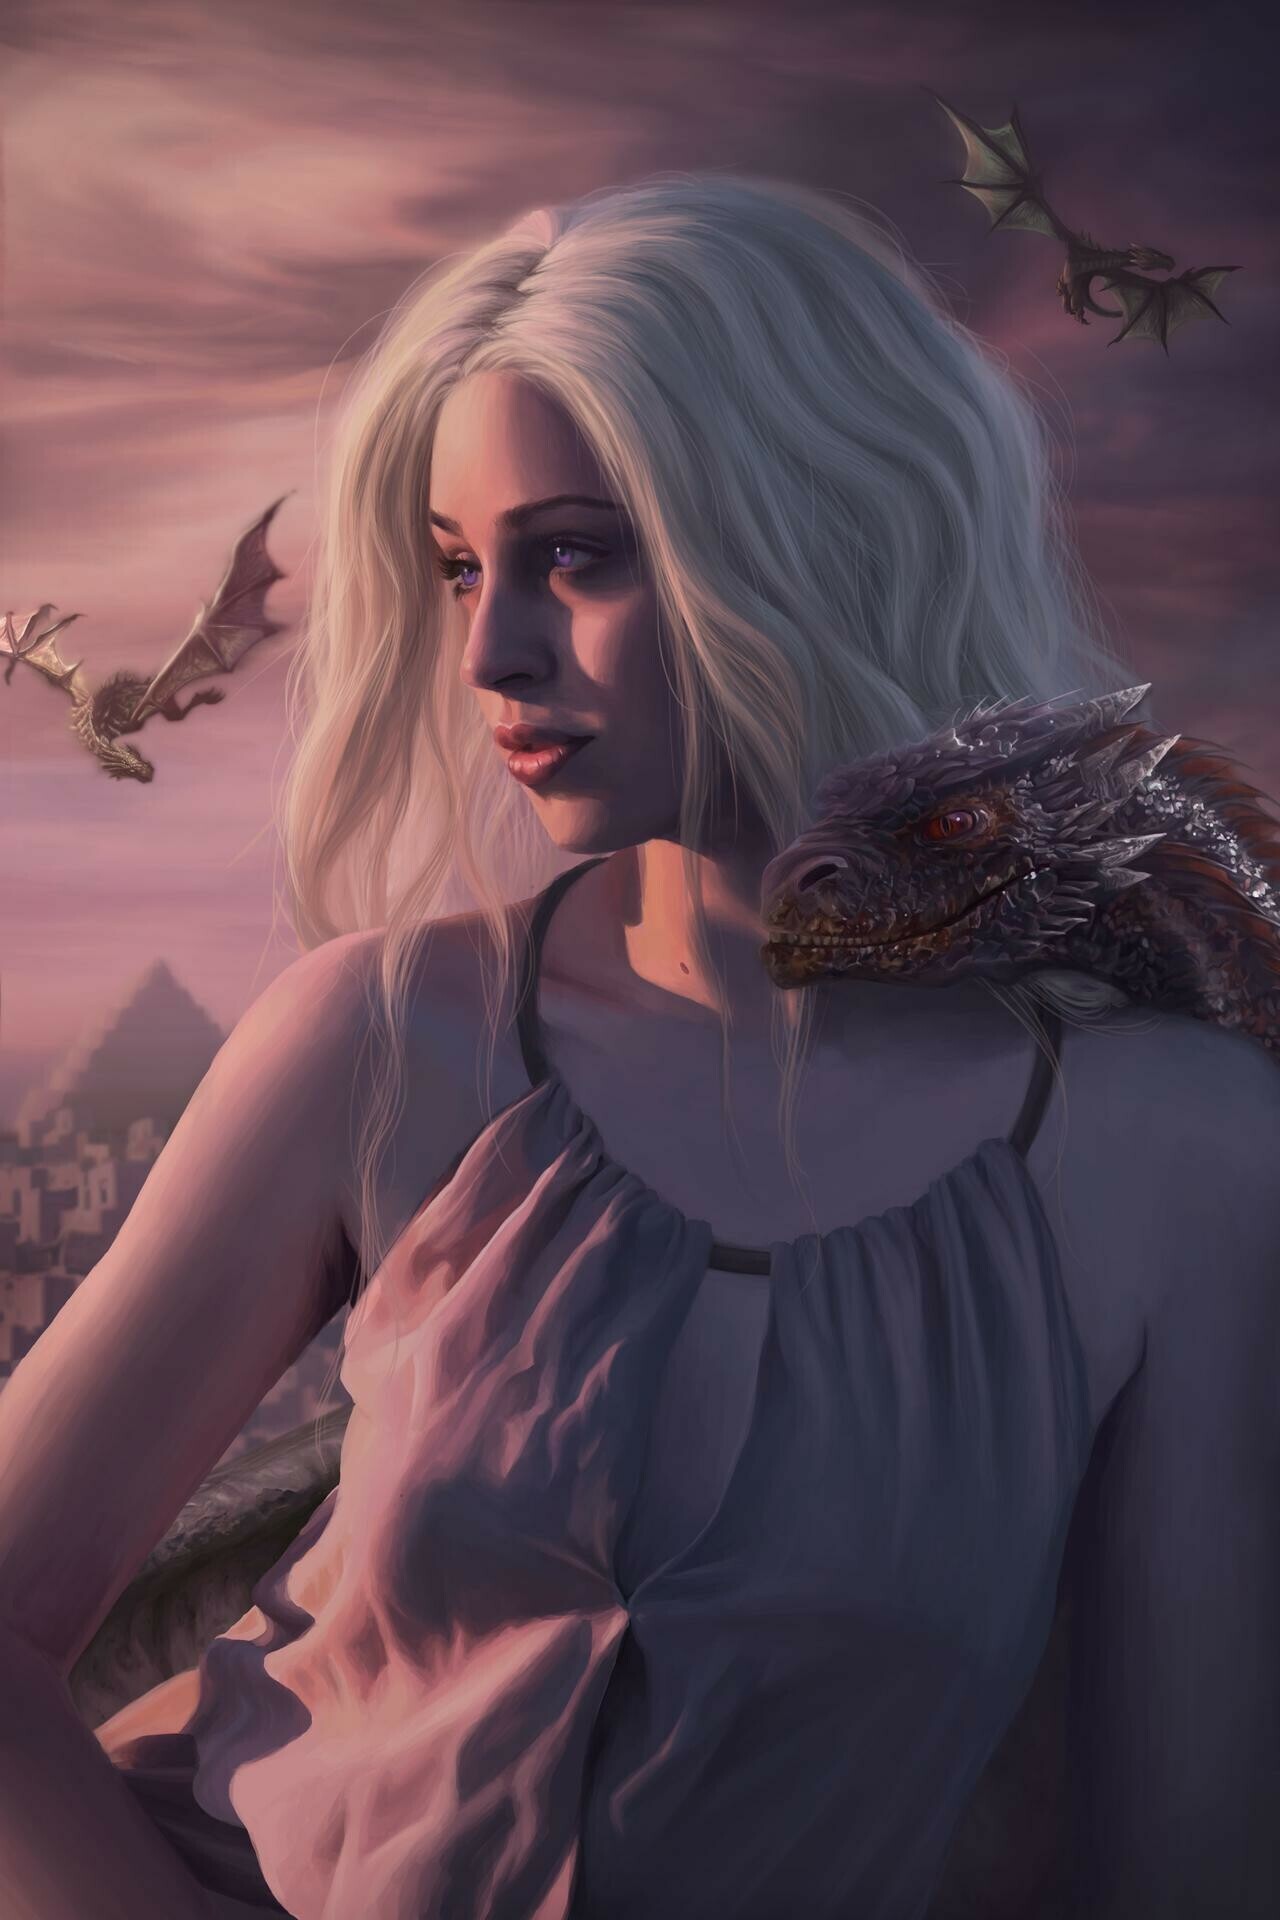 Daenerys Targaryen of A Song of Ice and Fire.